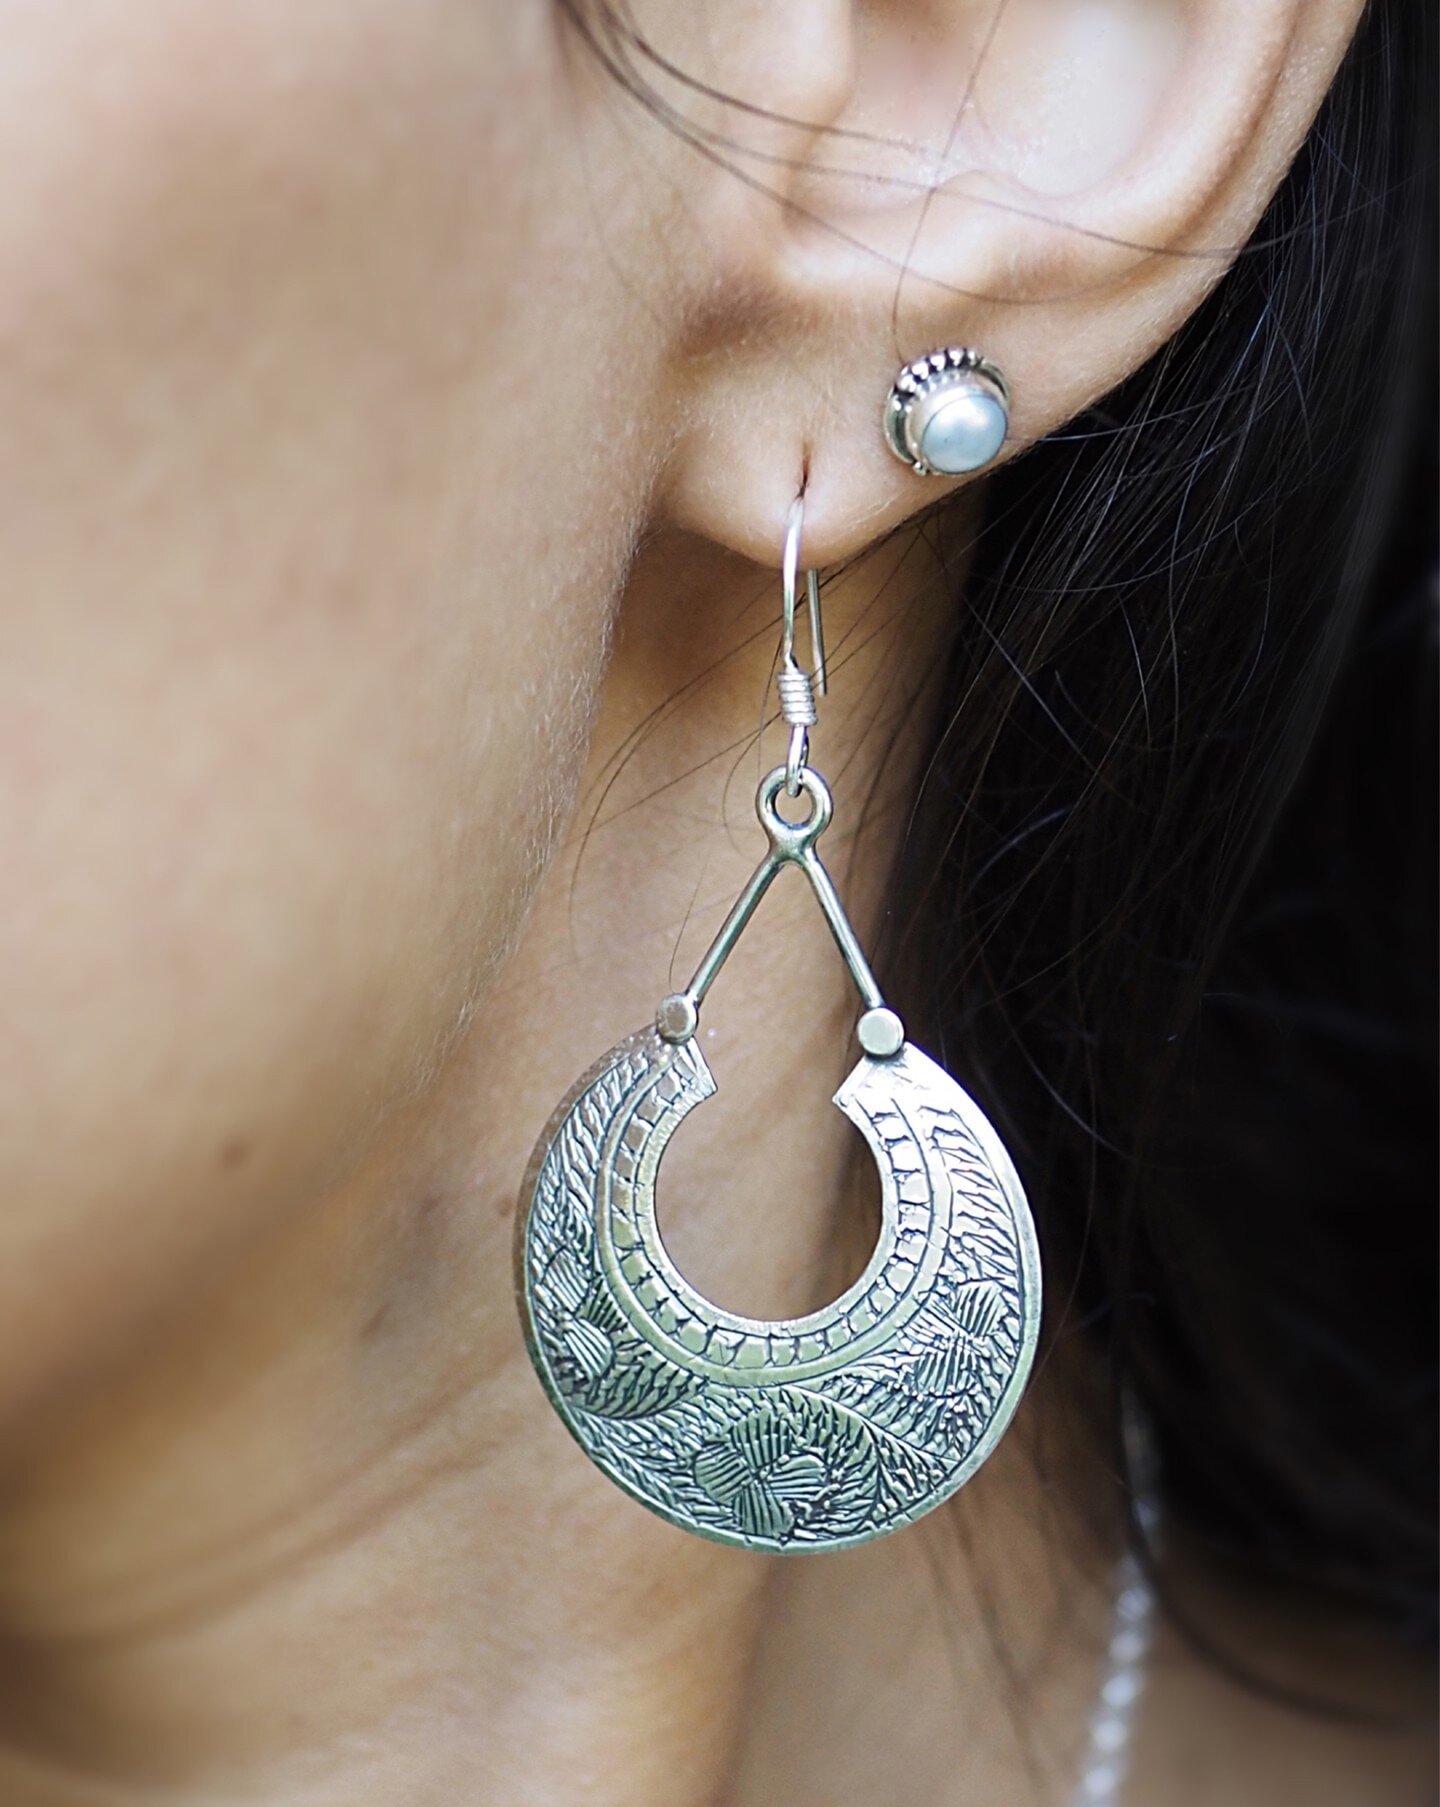 𝗟𝗼𝘃𝗶𝗻𝗴 𝘁𝗵𝗲 pearl and silver look with the Shante Earrings &amp; Sona Pearl Stud combination ✨ For a timeless, elegant, global and bohemian look... What more could you want really? 

#earringshandmade #earringslove #earringsfashion #bohemiane